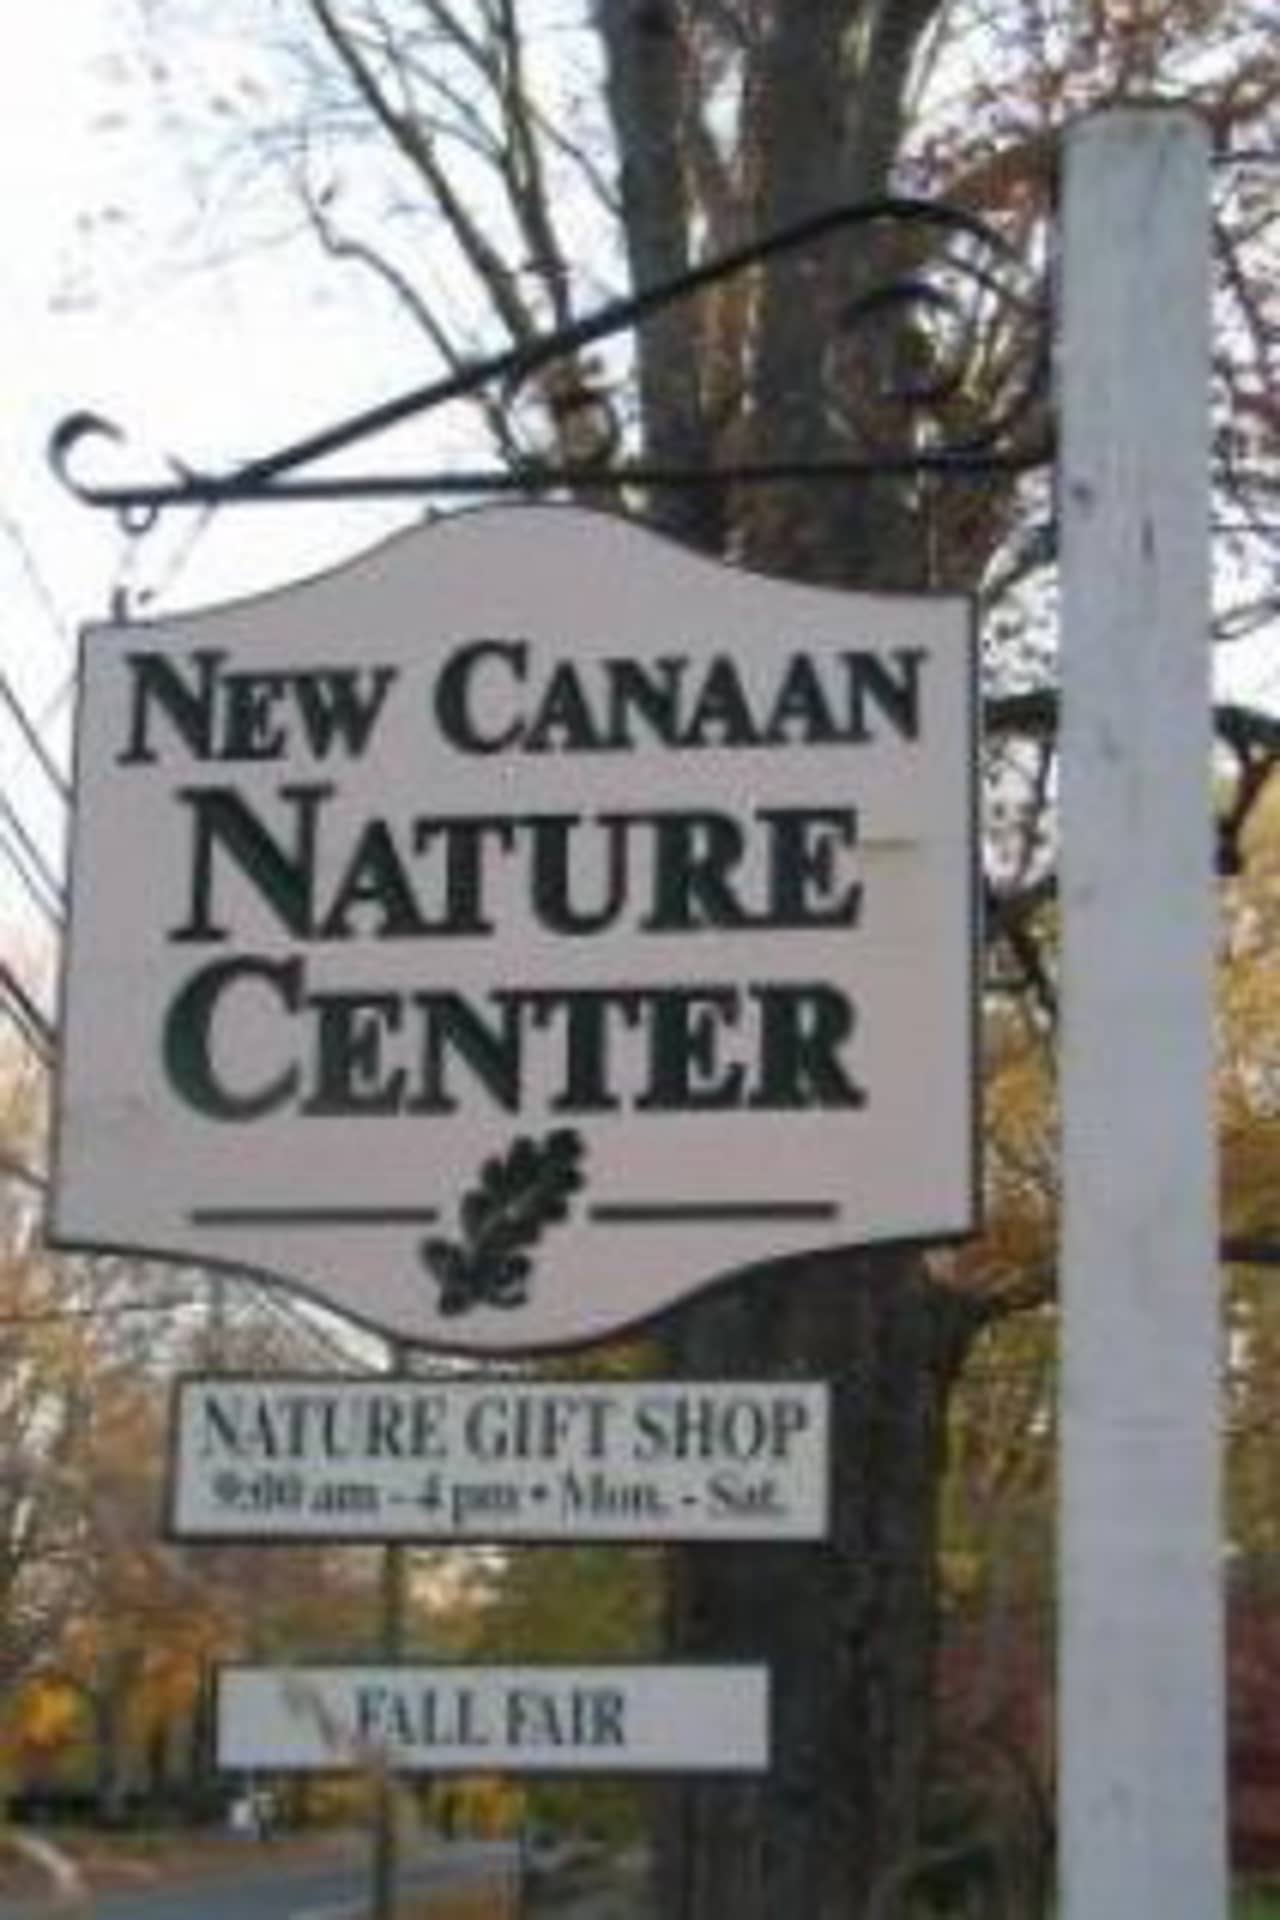 Join the New Canaan Nature Center on Nov. 30 for a hike to work off some of Thanksgiving dinner.